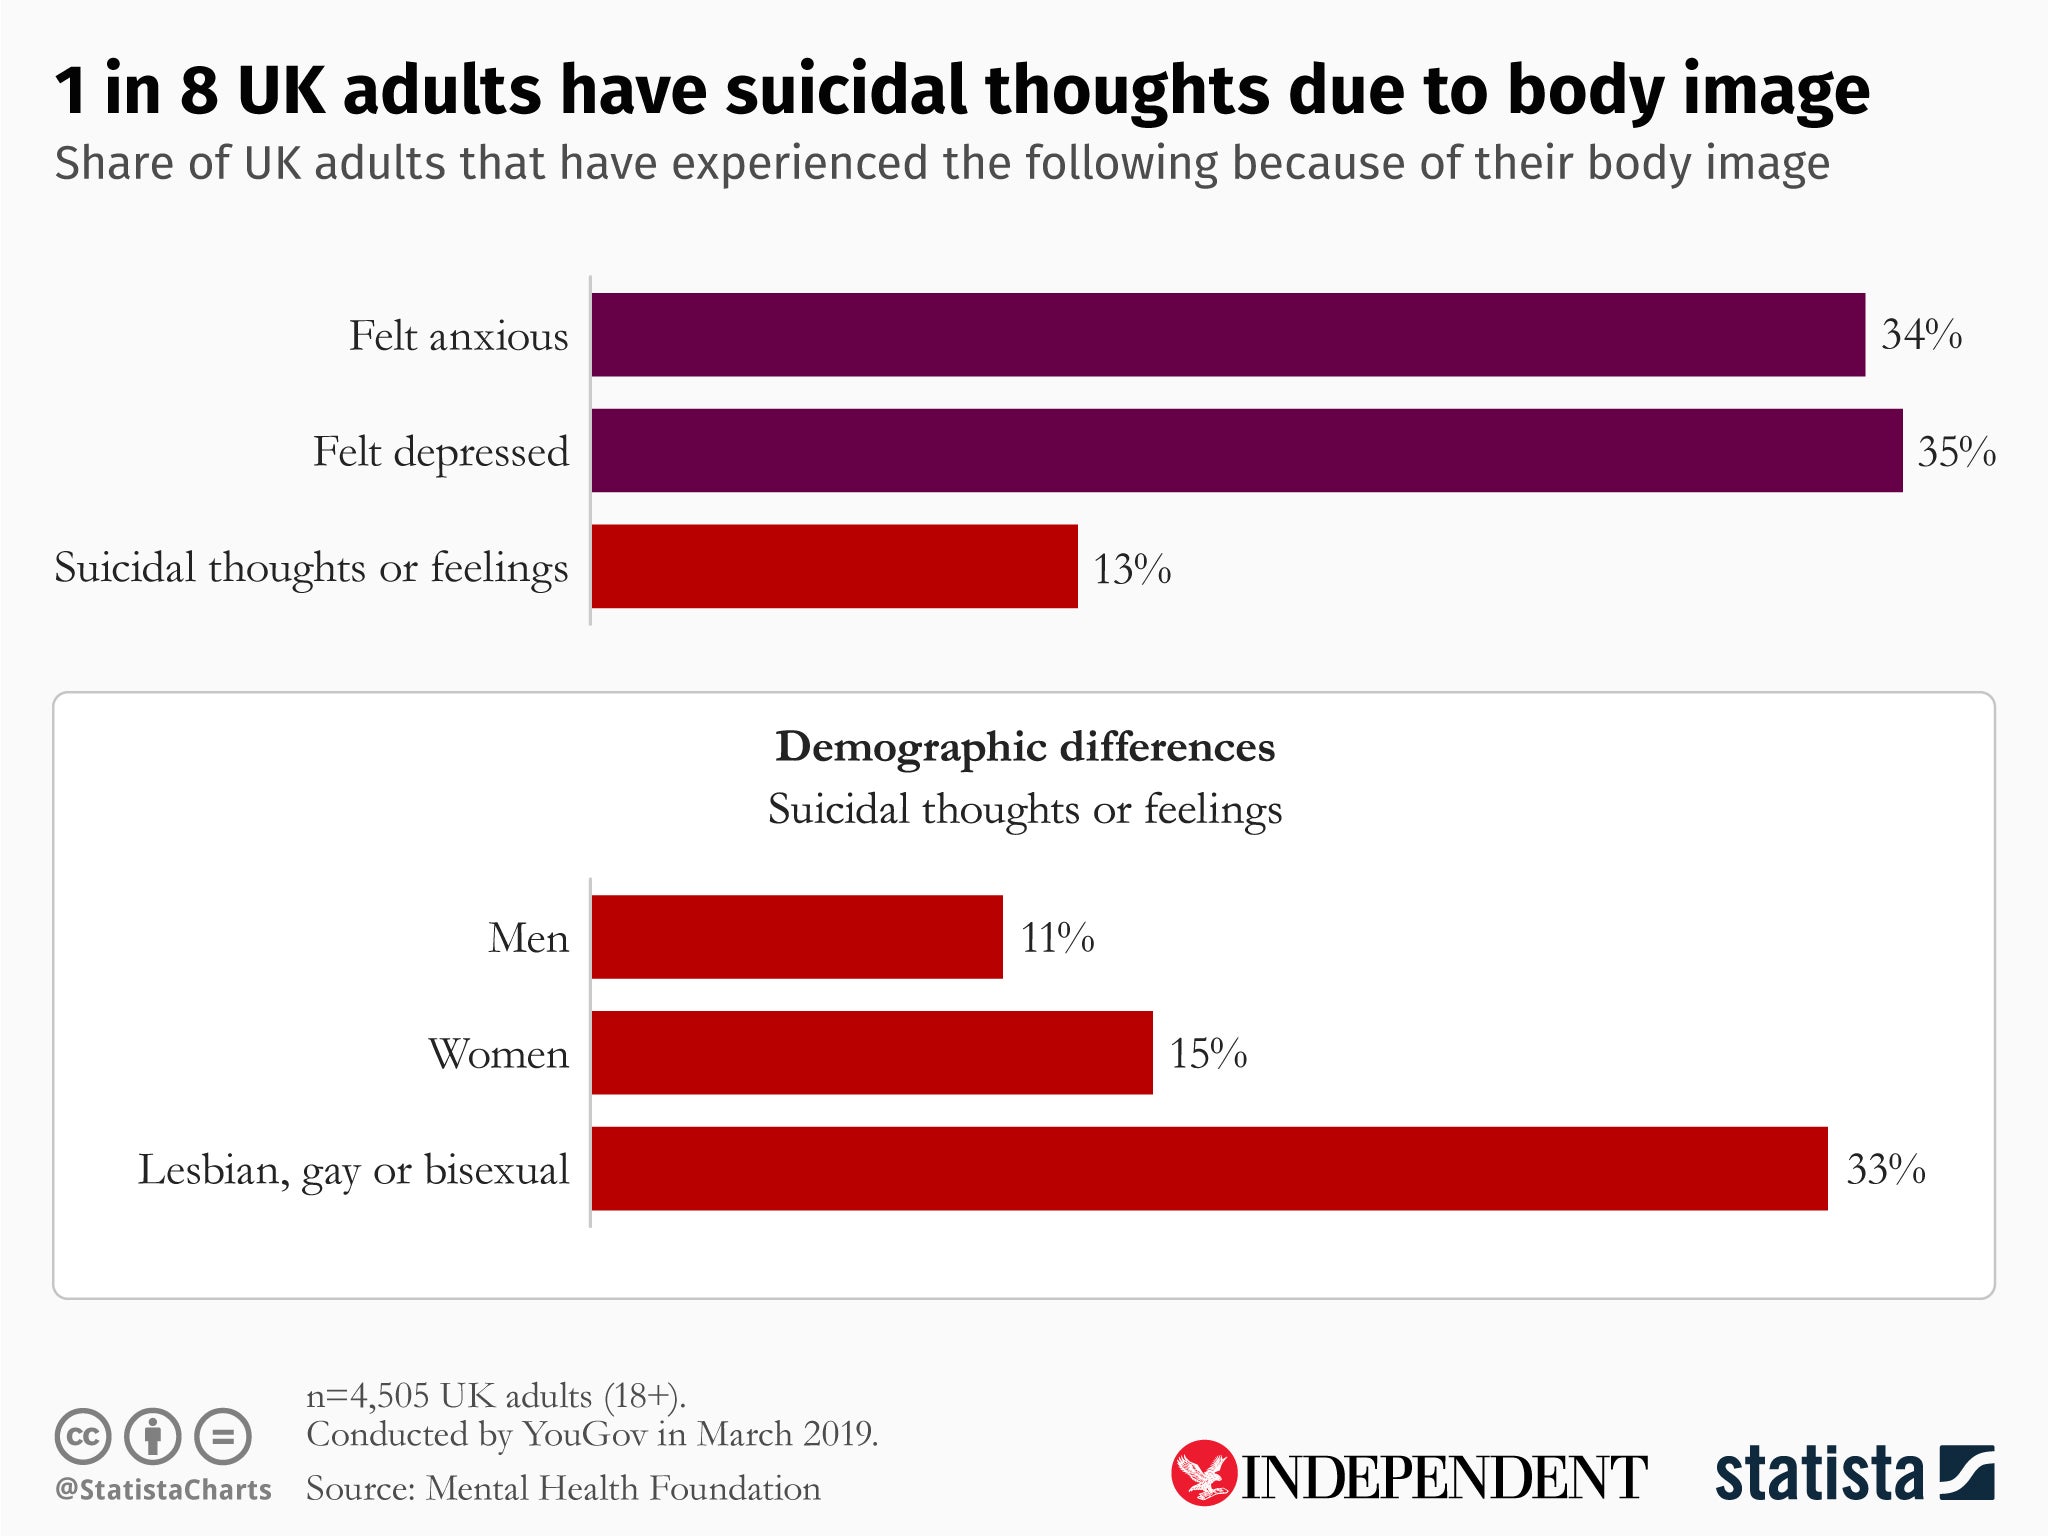 &#13;
(Statista/The Independent/Mental Health Foundation)&#13;